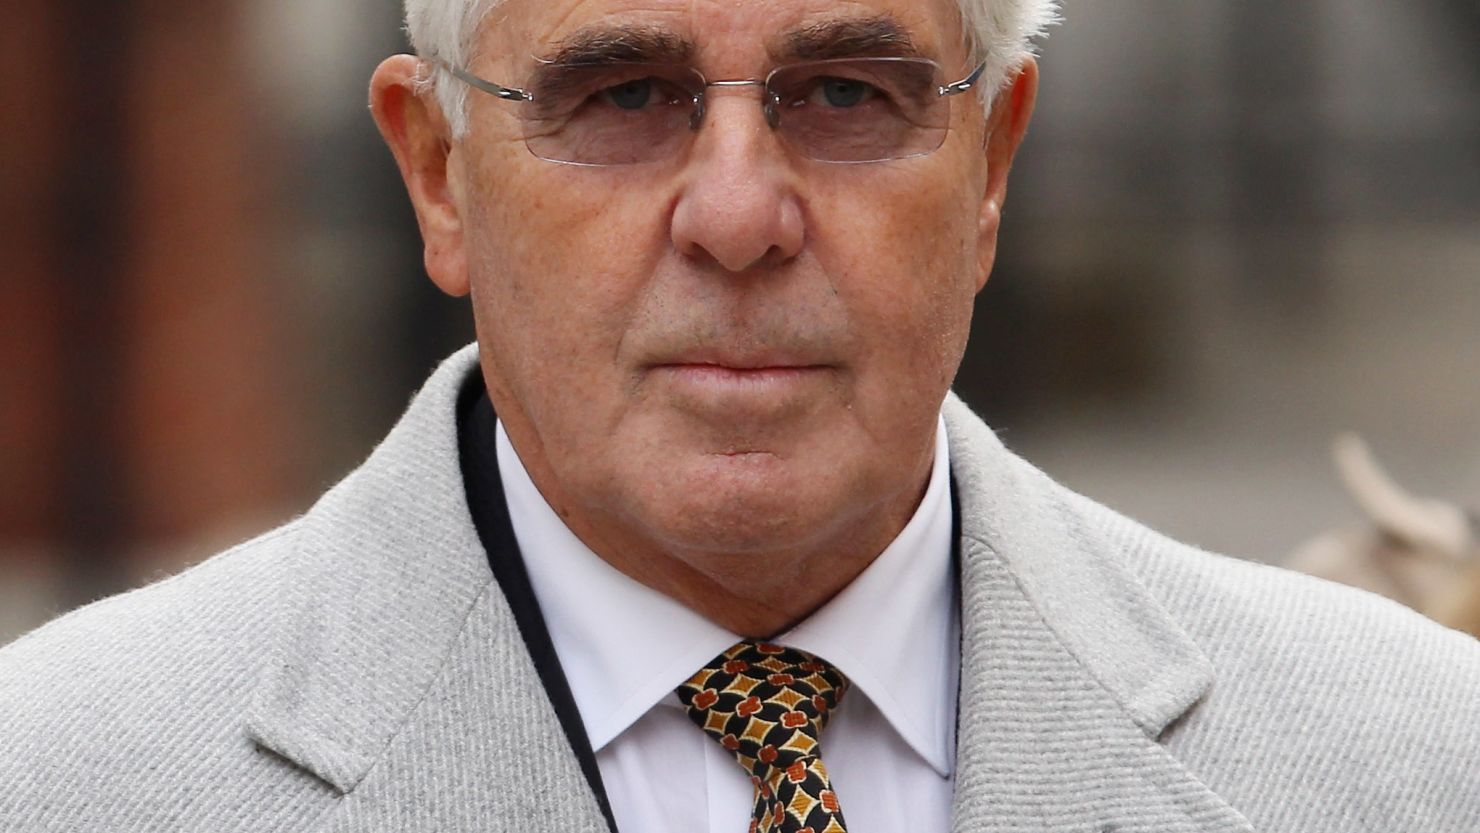 Max Clifford is Britain's most famous celebrity PR consultant, renowned for his decades-long expertise in "kiss-and-tell" clients.